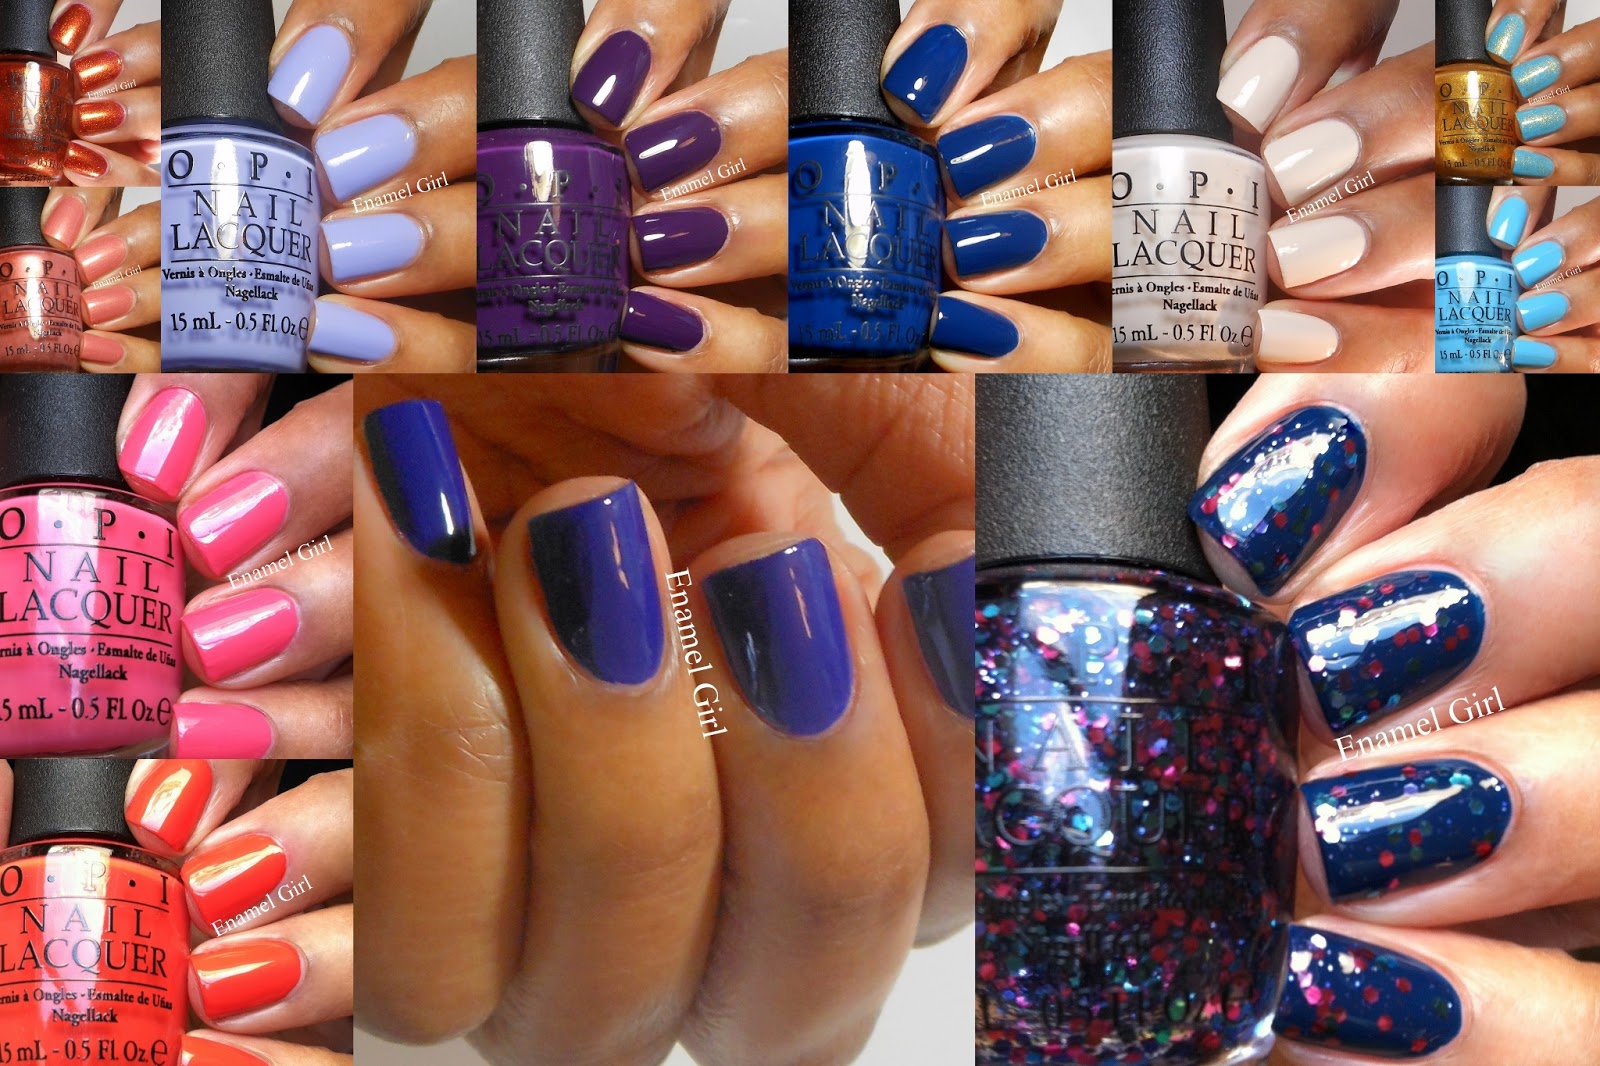 OPI Euro Centrale Spring 2013 Nail Polish Swatches & Review : All Lacquered  Up